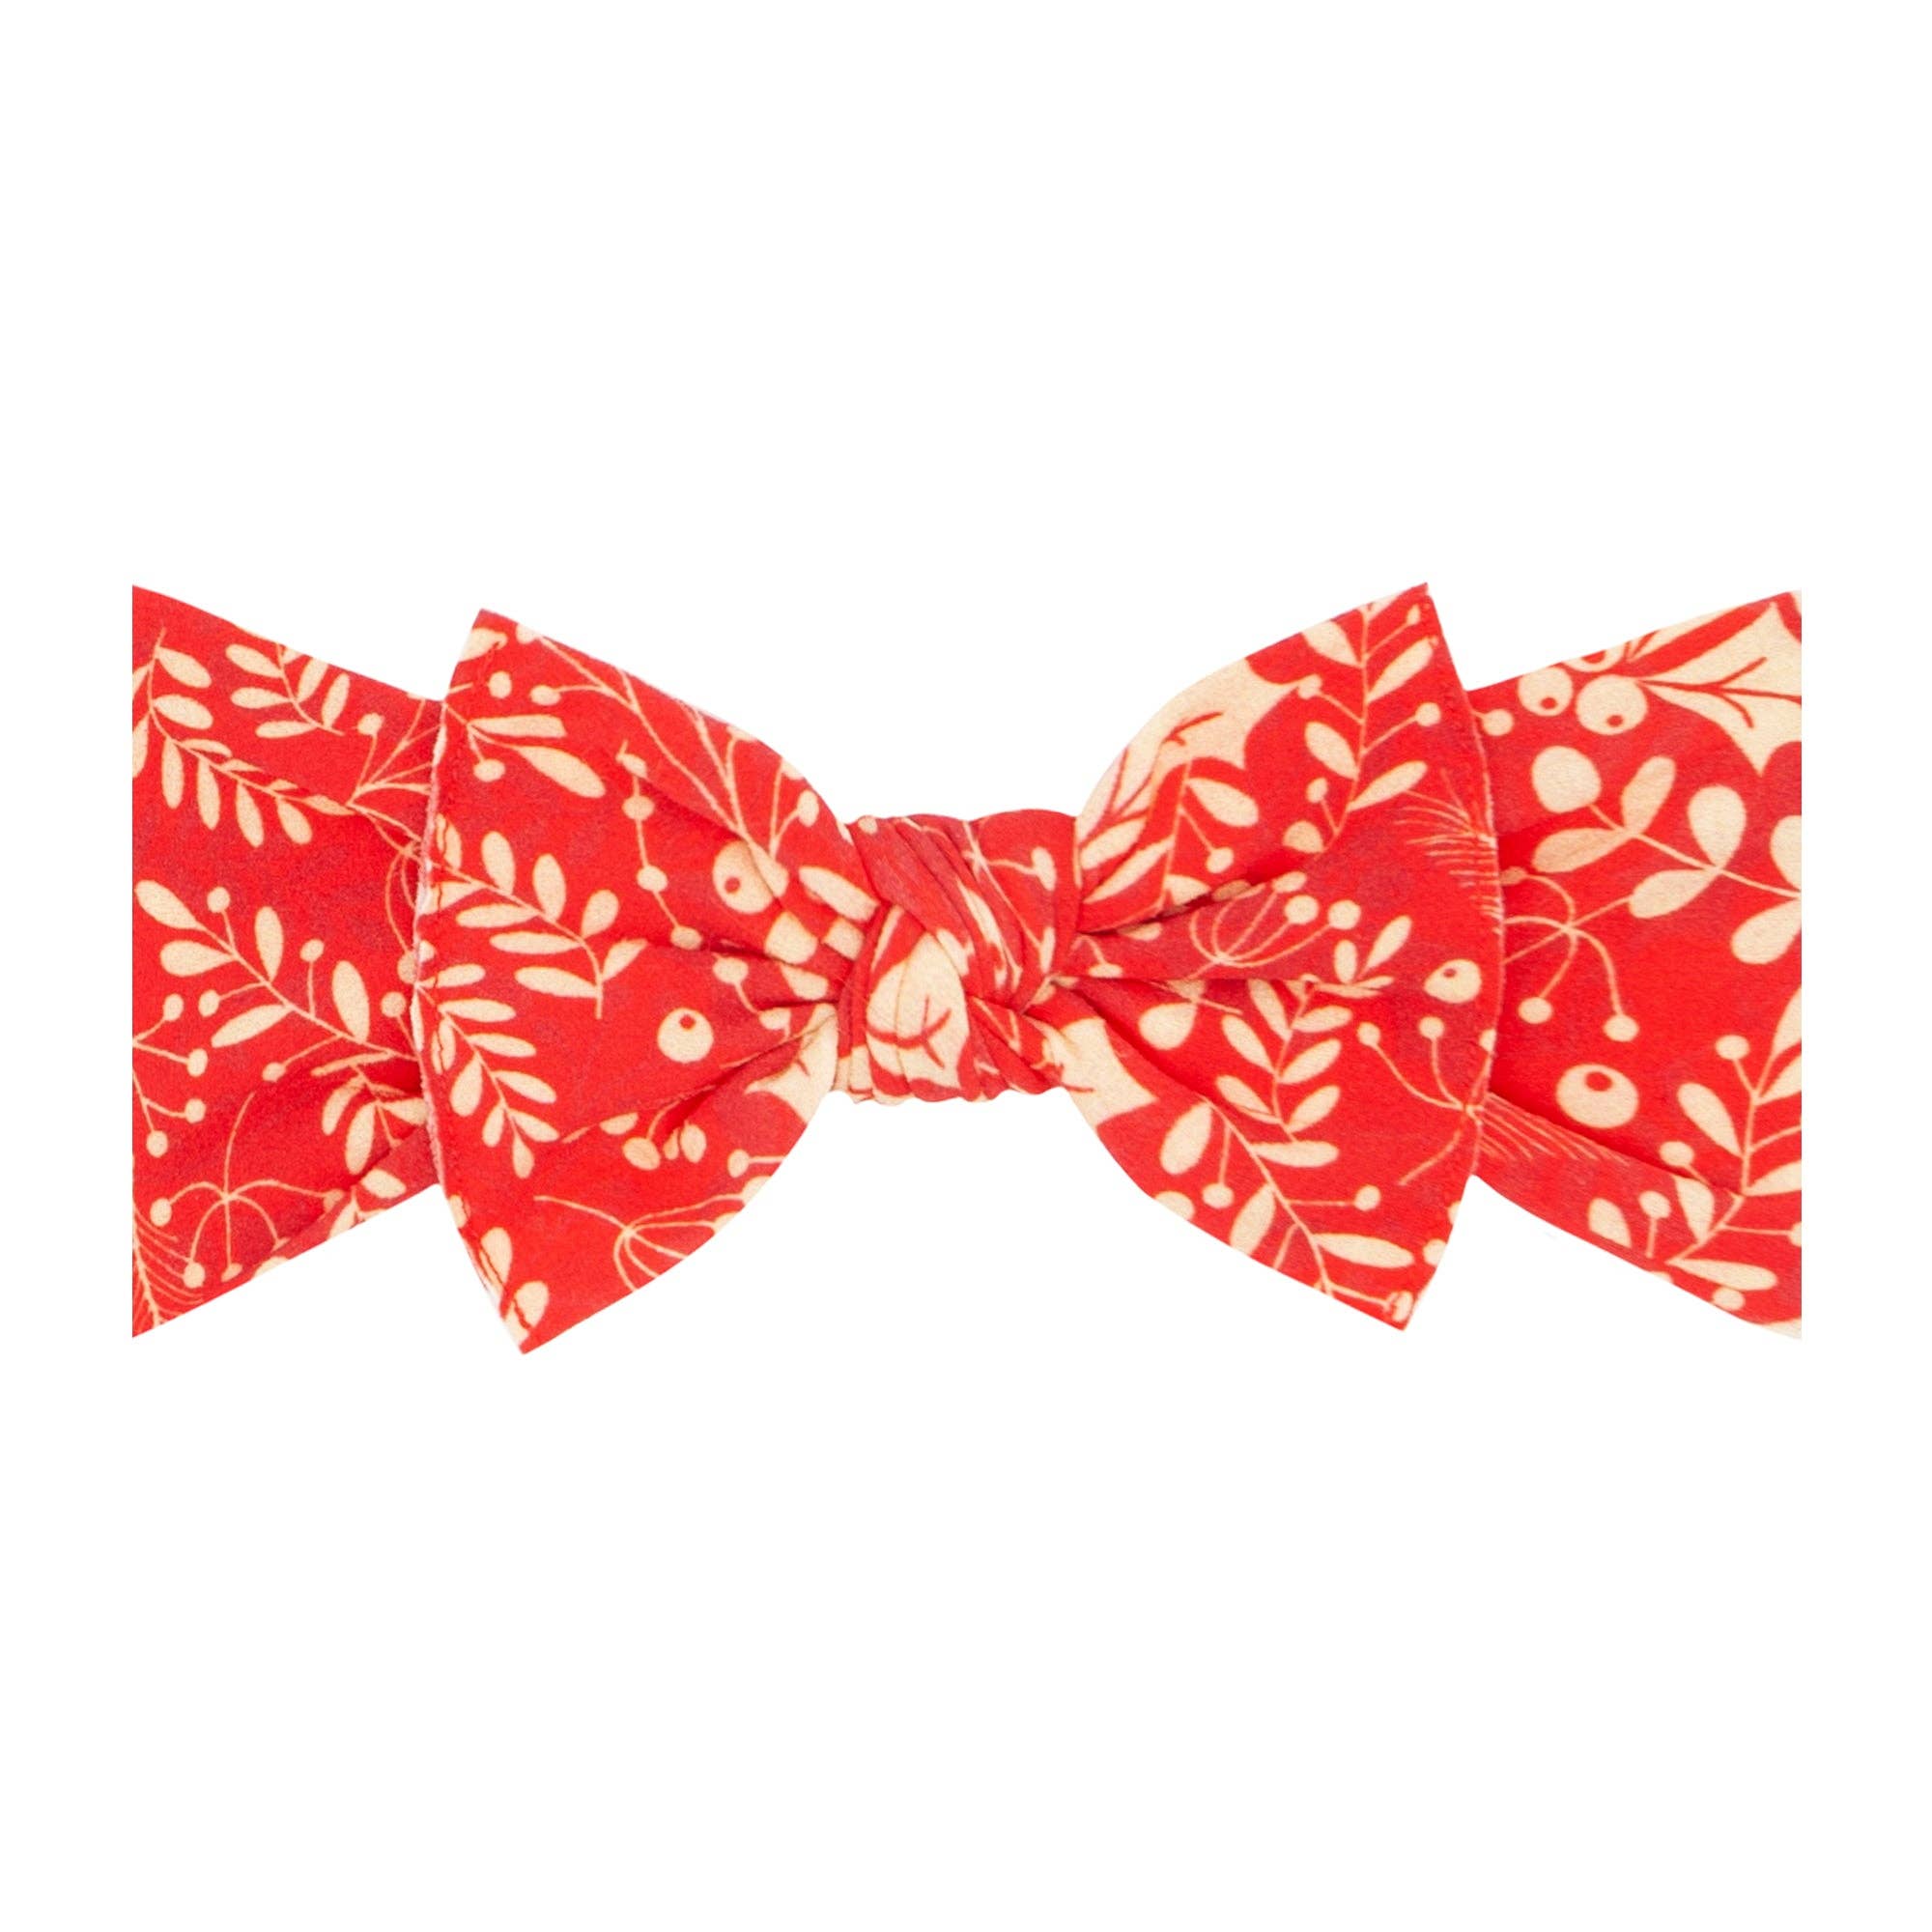 PRINTED KNOT: red bough